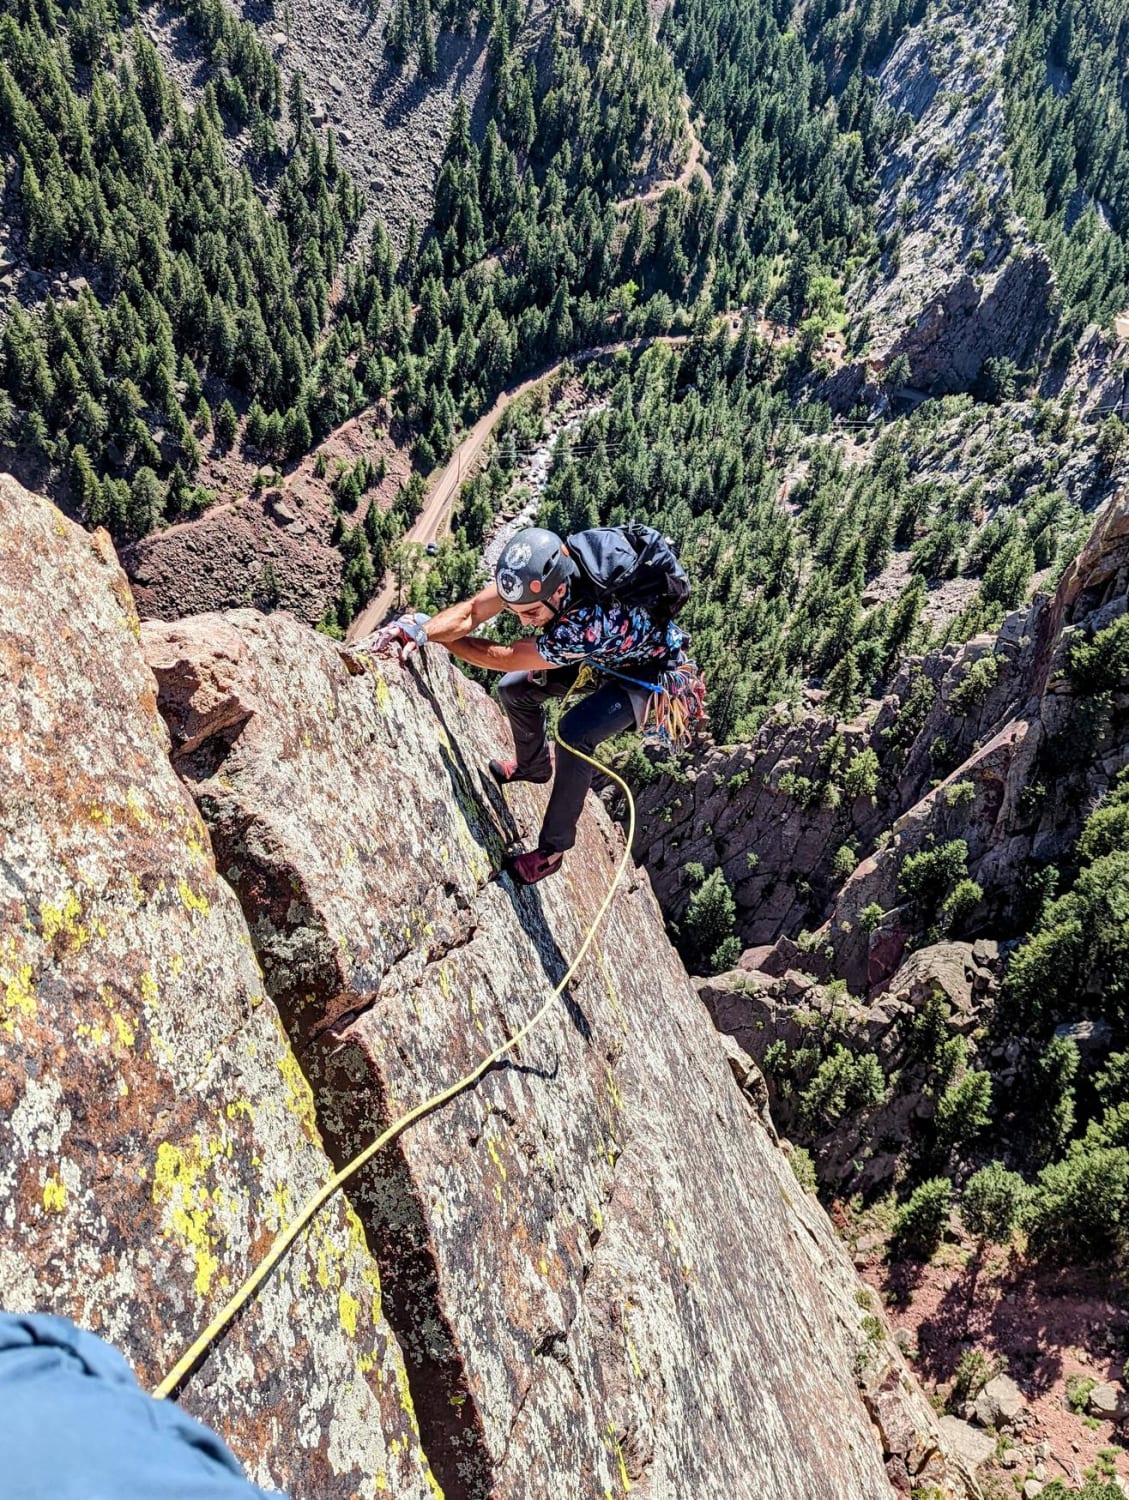 The Yellow Spur, 5.9+ at Eldorado Canyon, Colorado. Our first day in Eldo went really well, this place is amazing